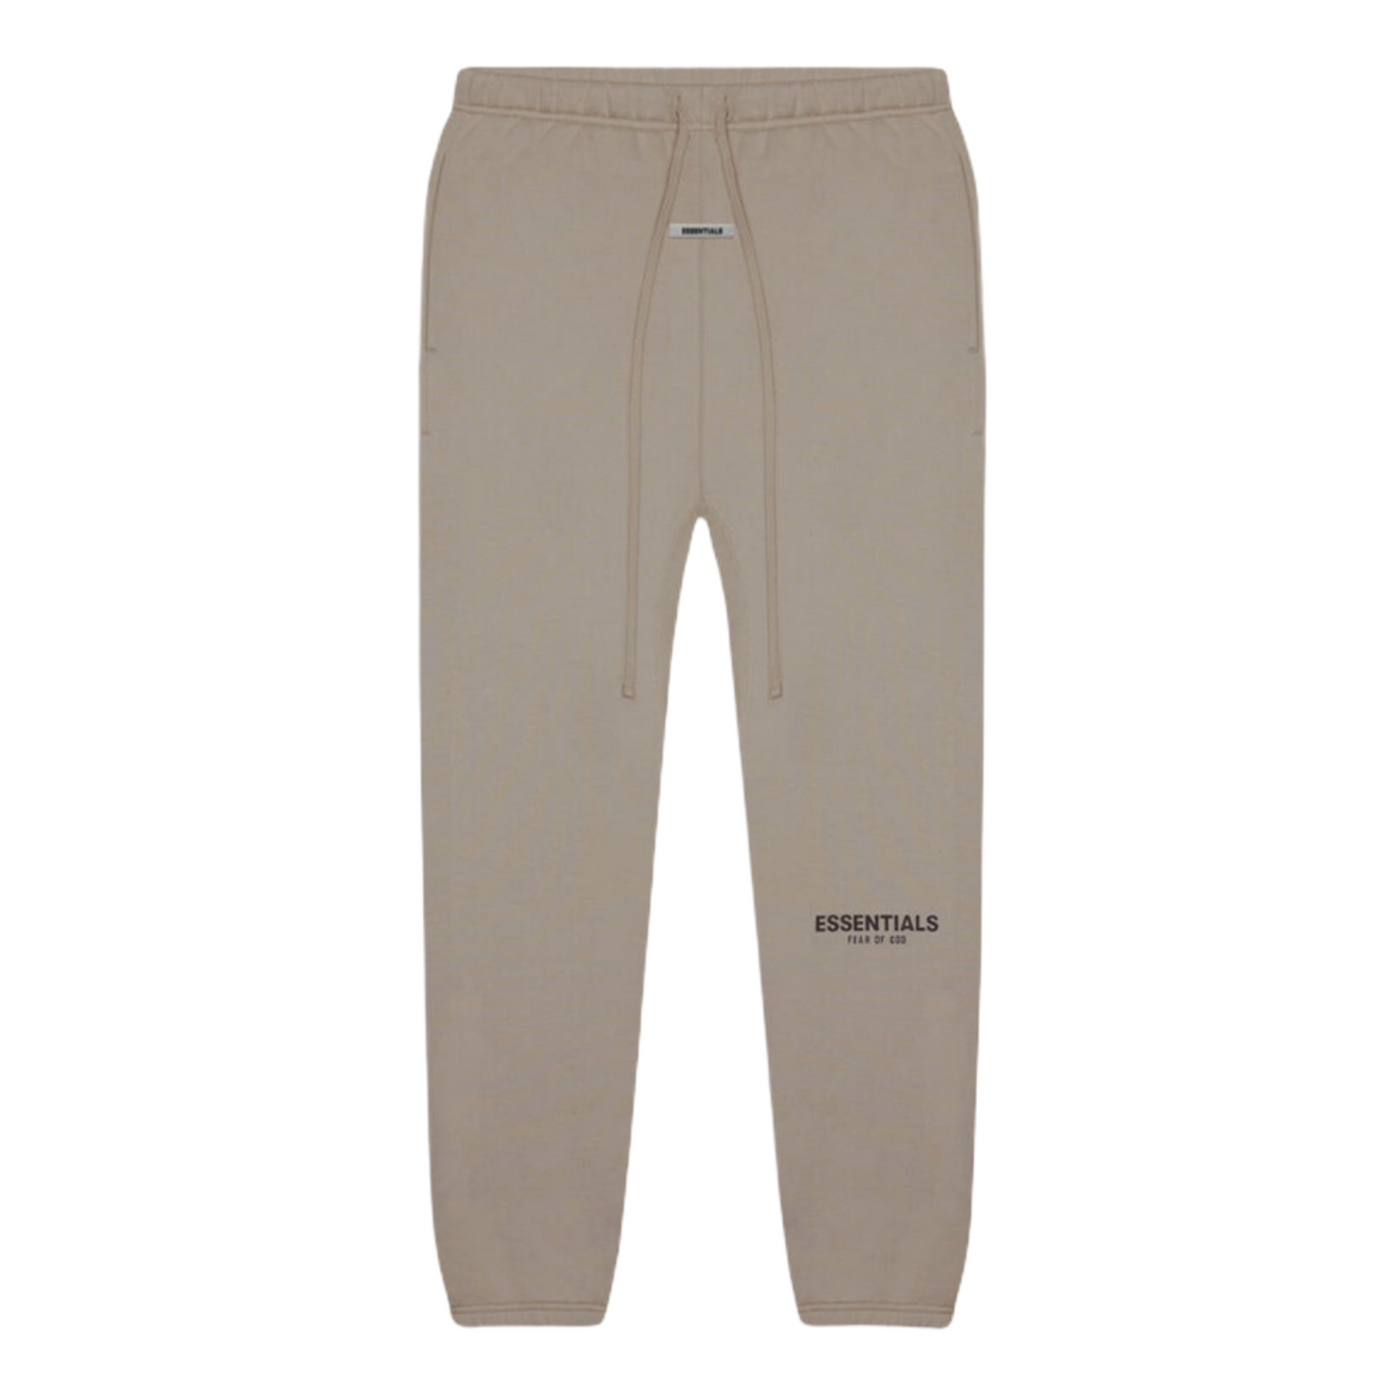 FEAR OF GOD ESSENTIALS TAUPE SWEATPANTS